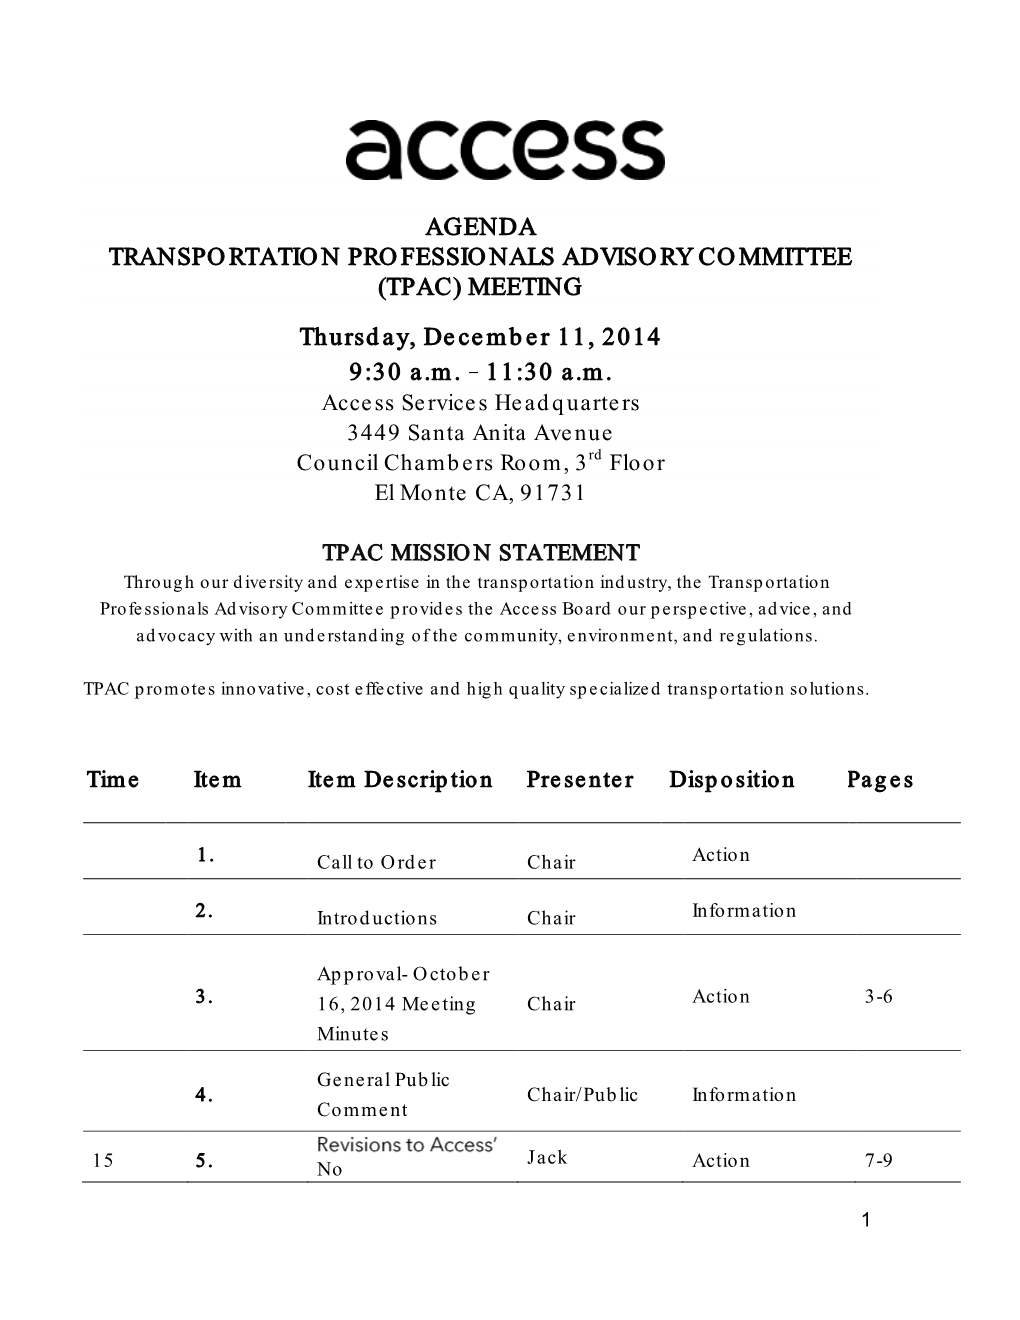 AGENDA TRANSPORTATION PROFESSIONALS ADVISORY COMMITTEE (TPAC) MEETING Thursday, December 11, 2014 9:30 A.M. 11:30 A.M